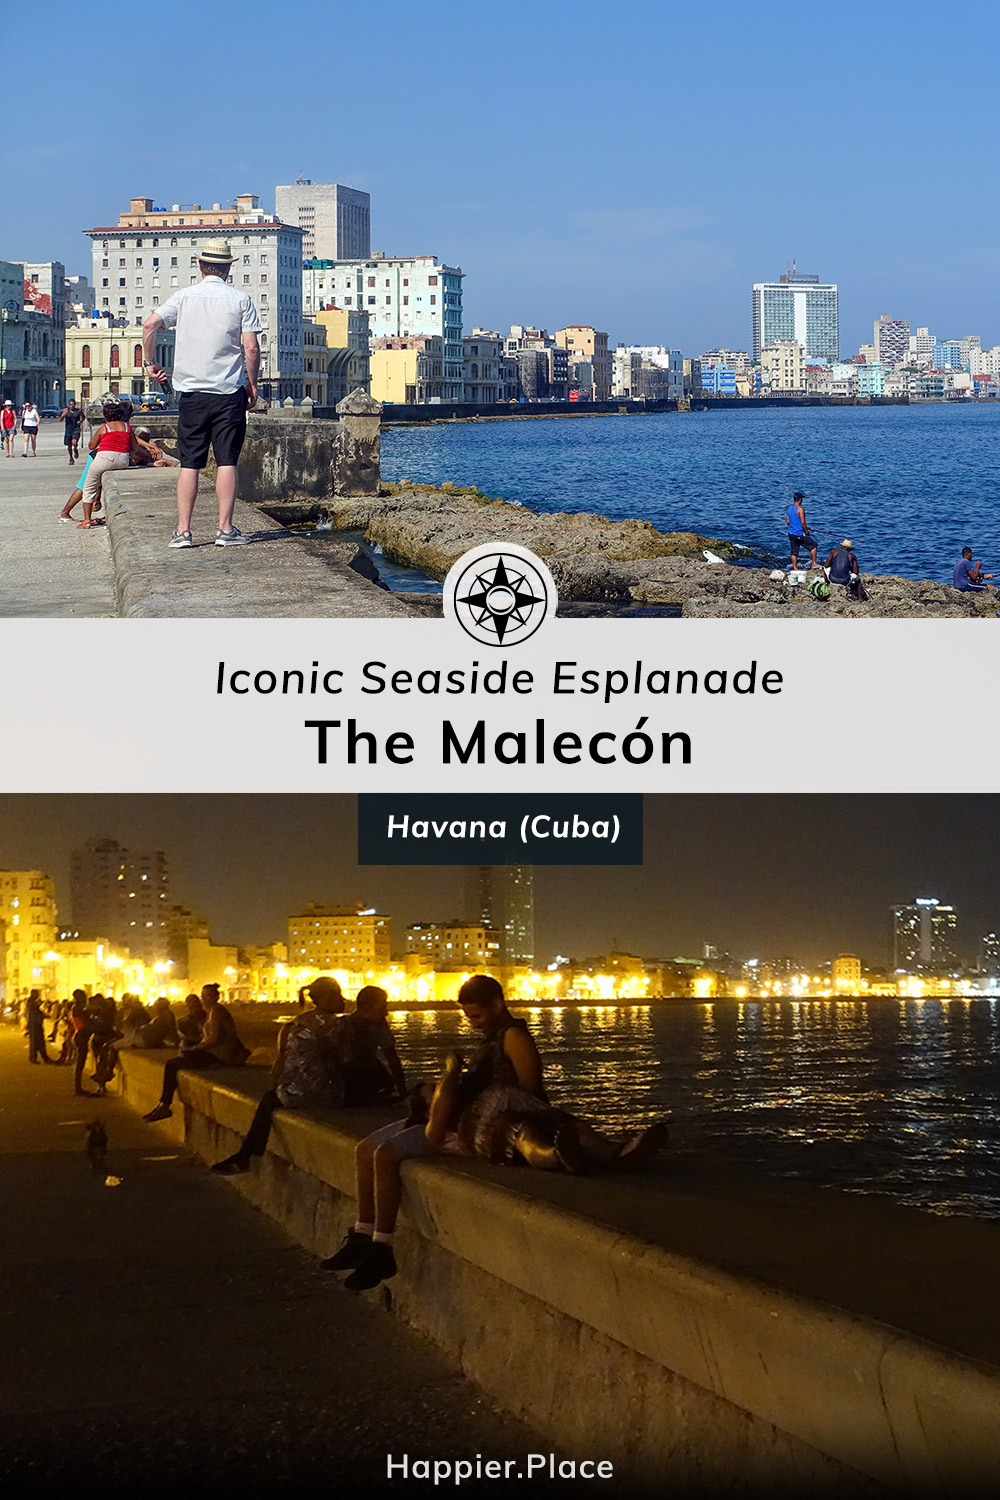 Day and night along the Malecón, iconic seaside esplanade, Havana, Cuba, Happier Place